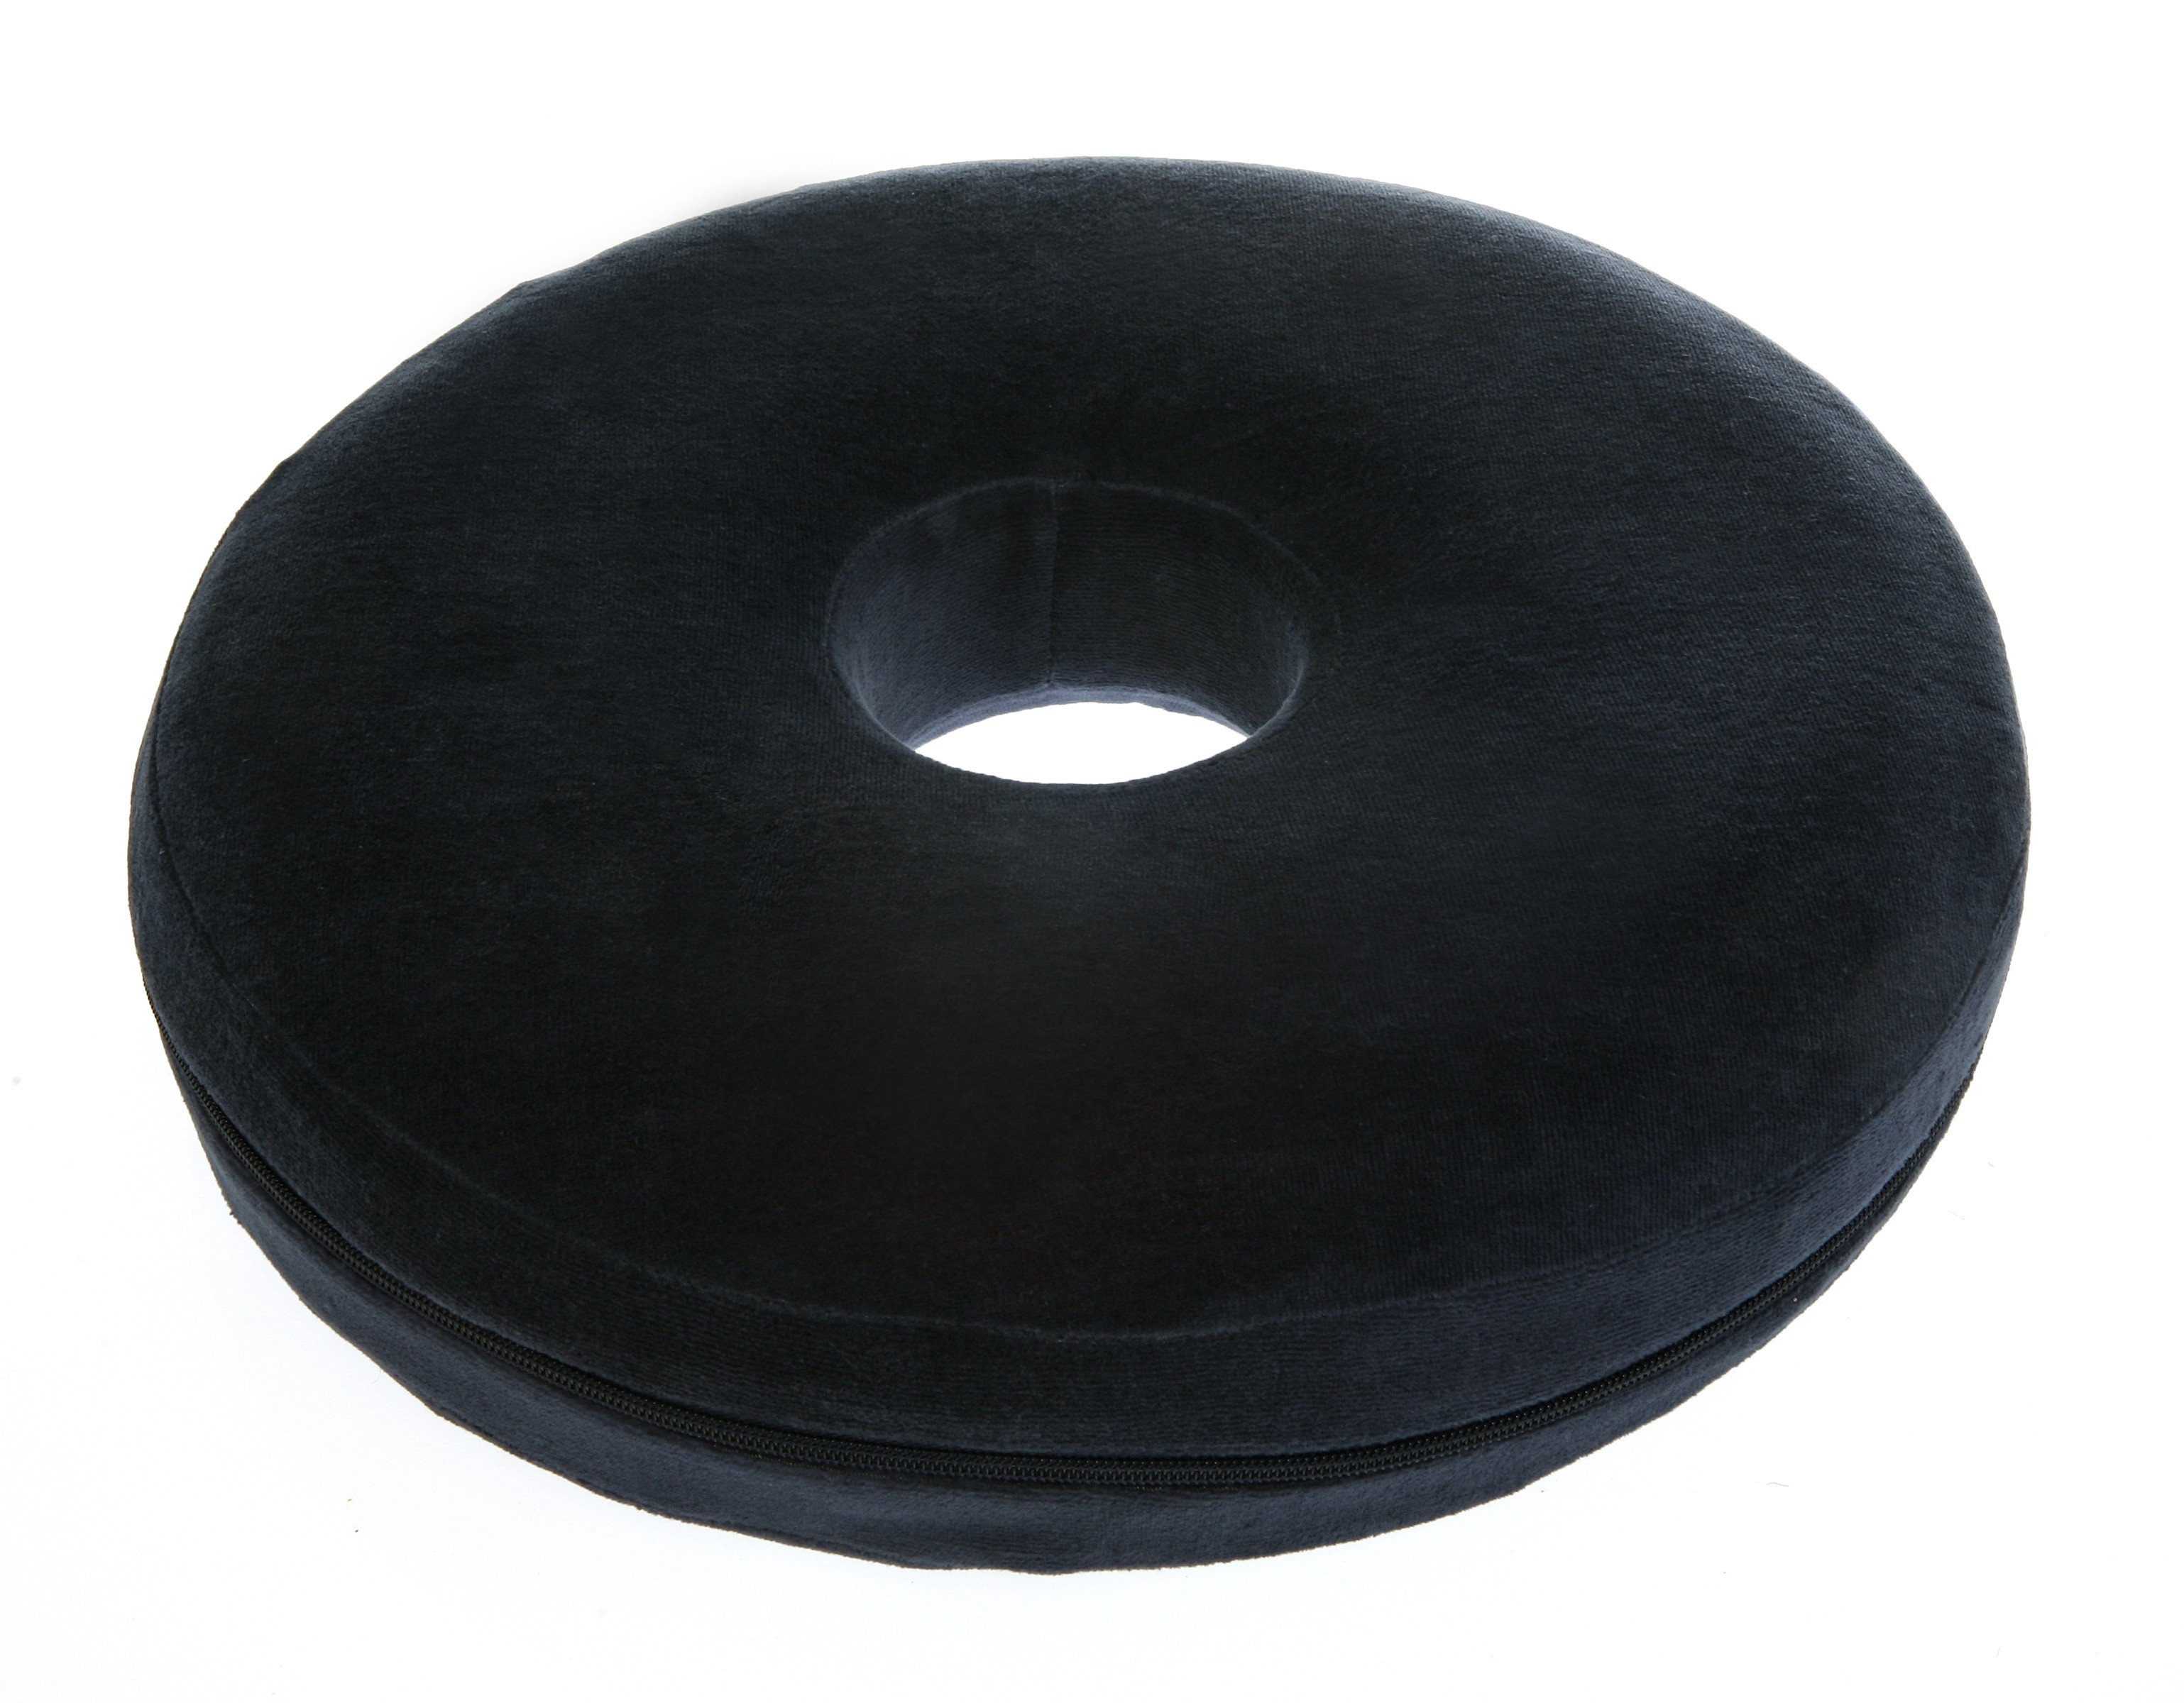 Donut Pillow - Best Ring Shaped Supportive Foam